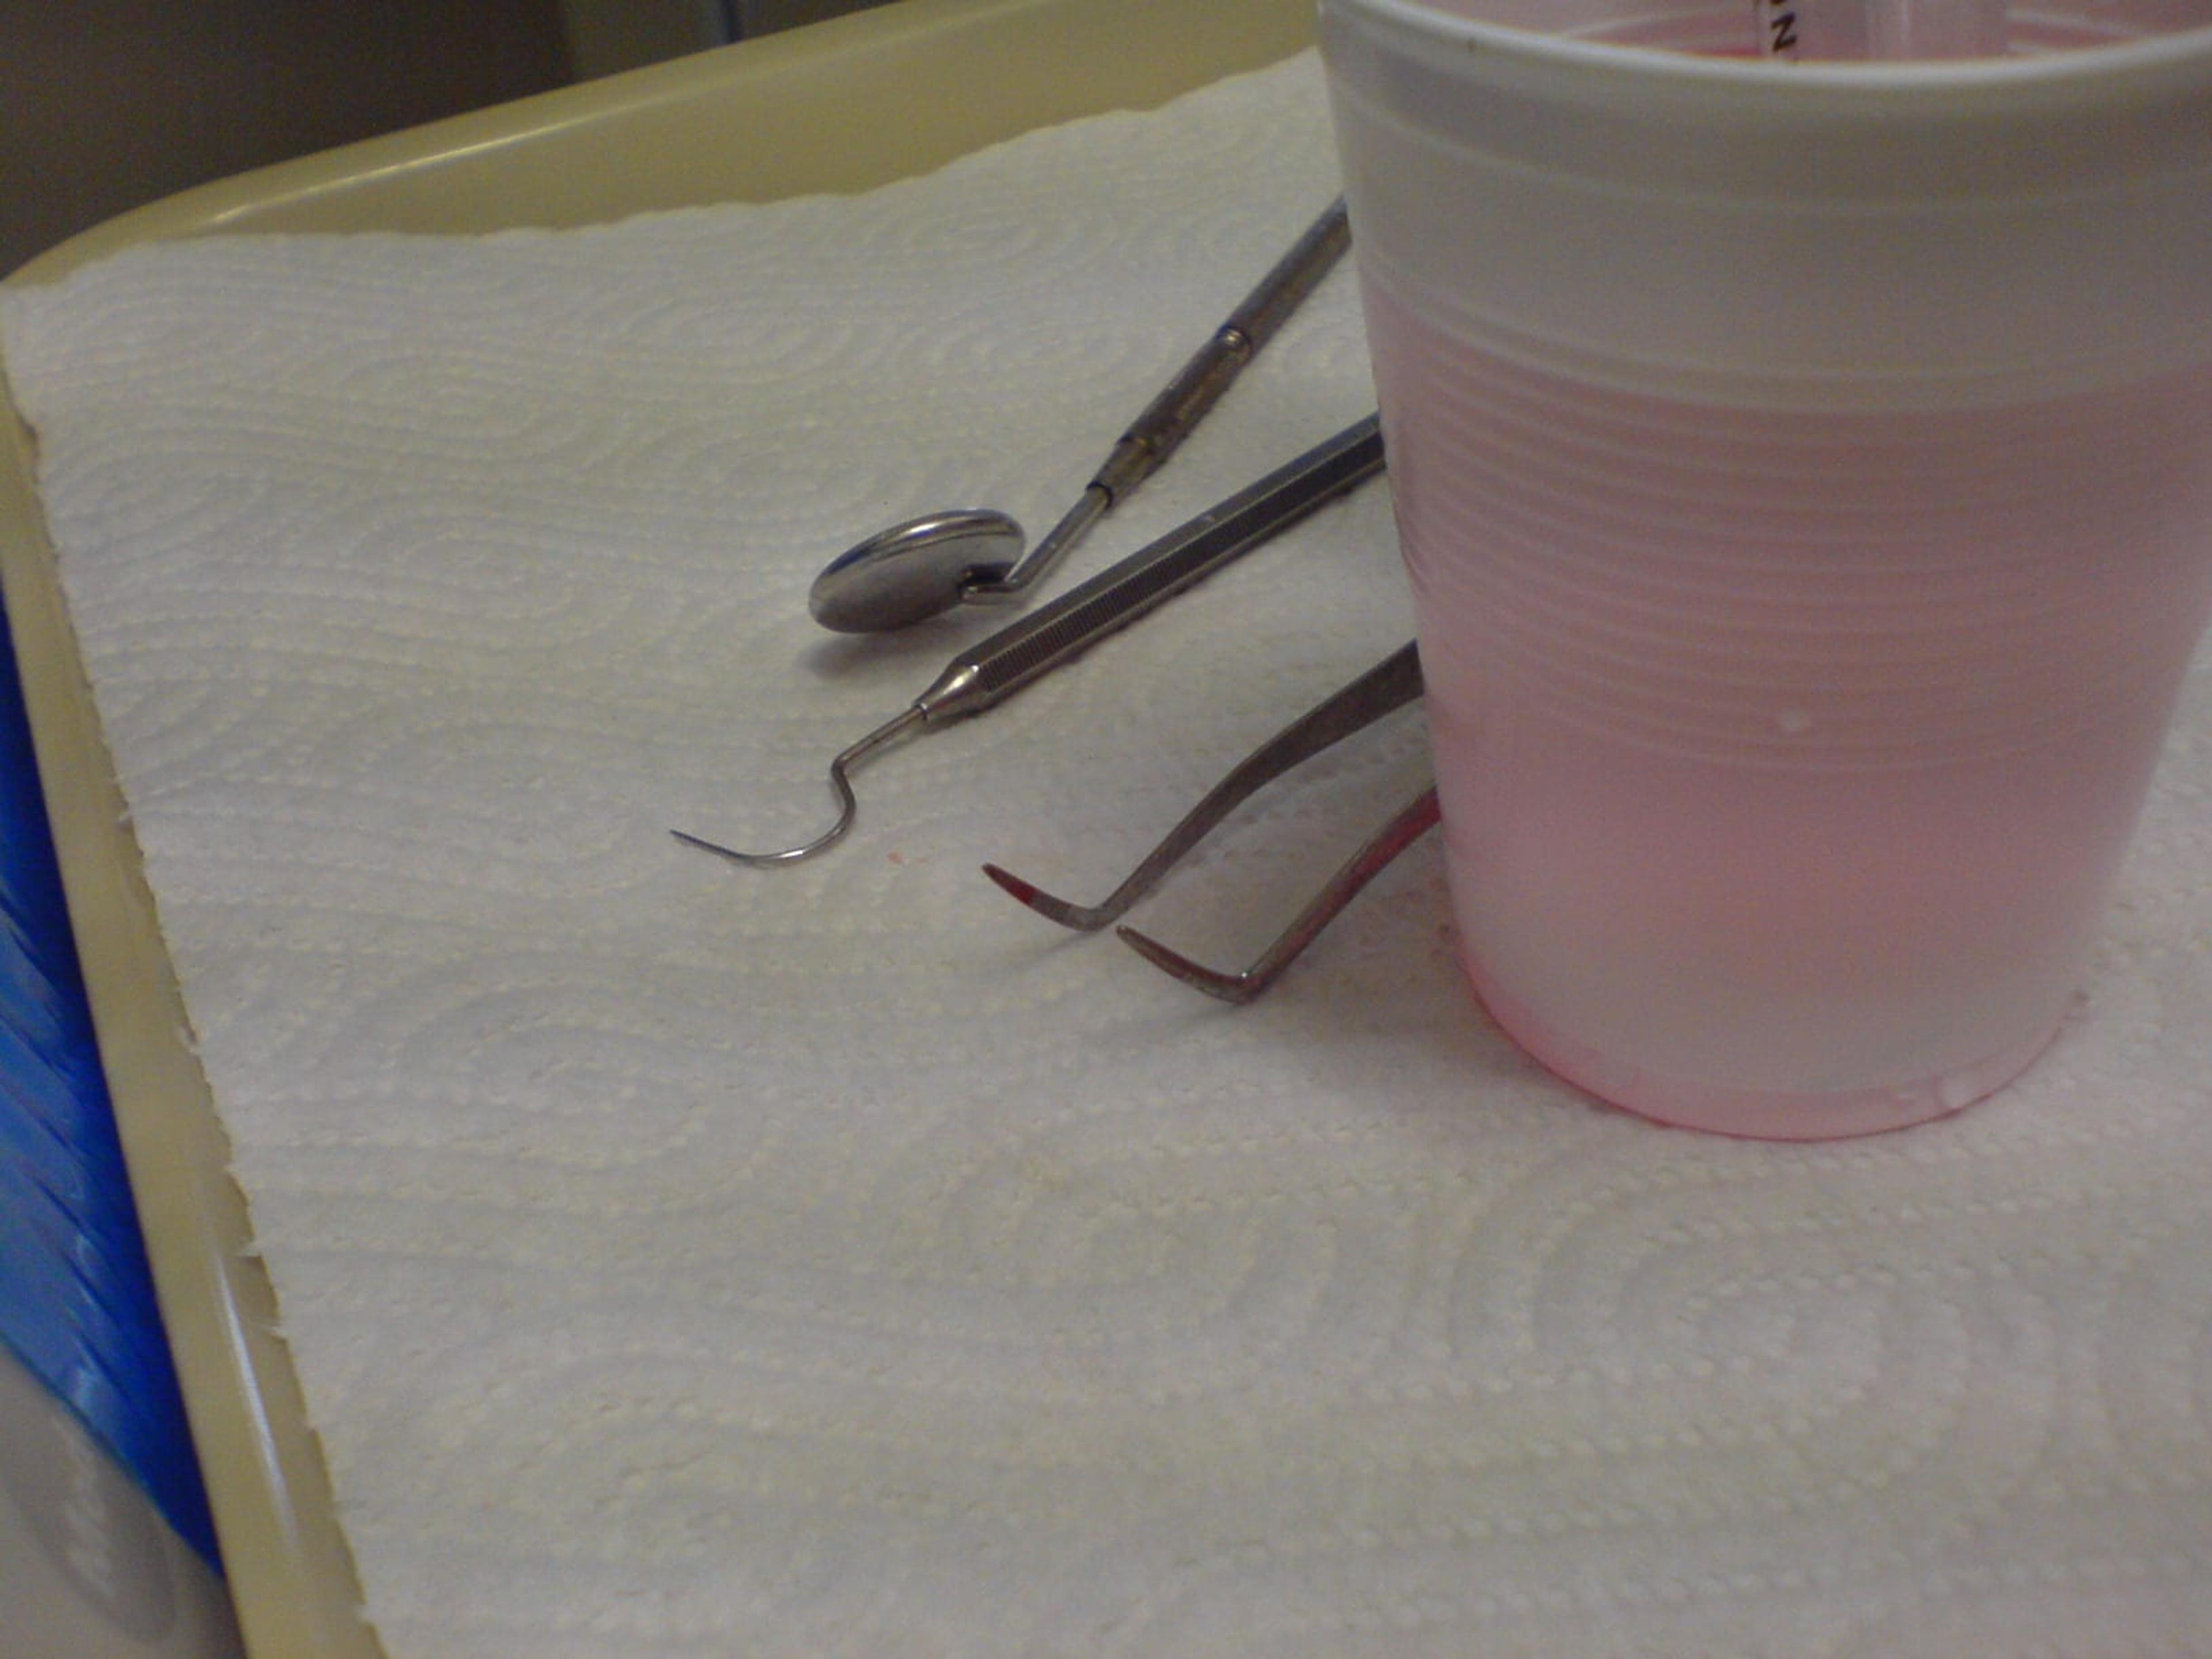 Dental tools next to a plastic cup